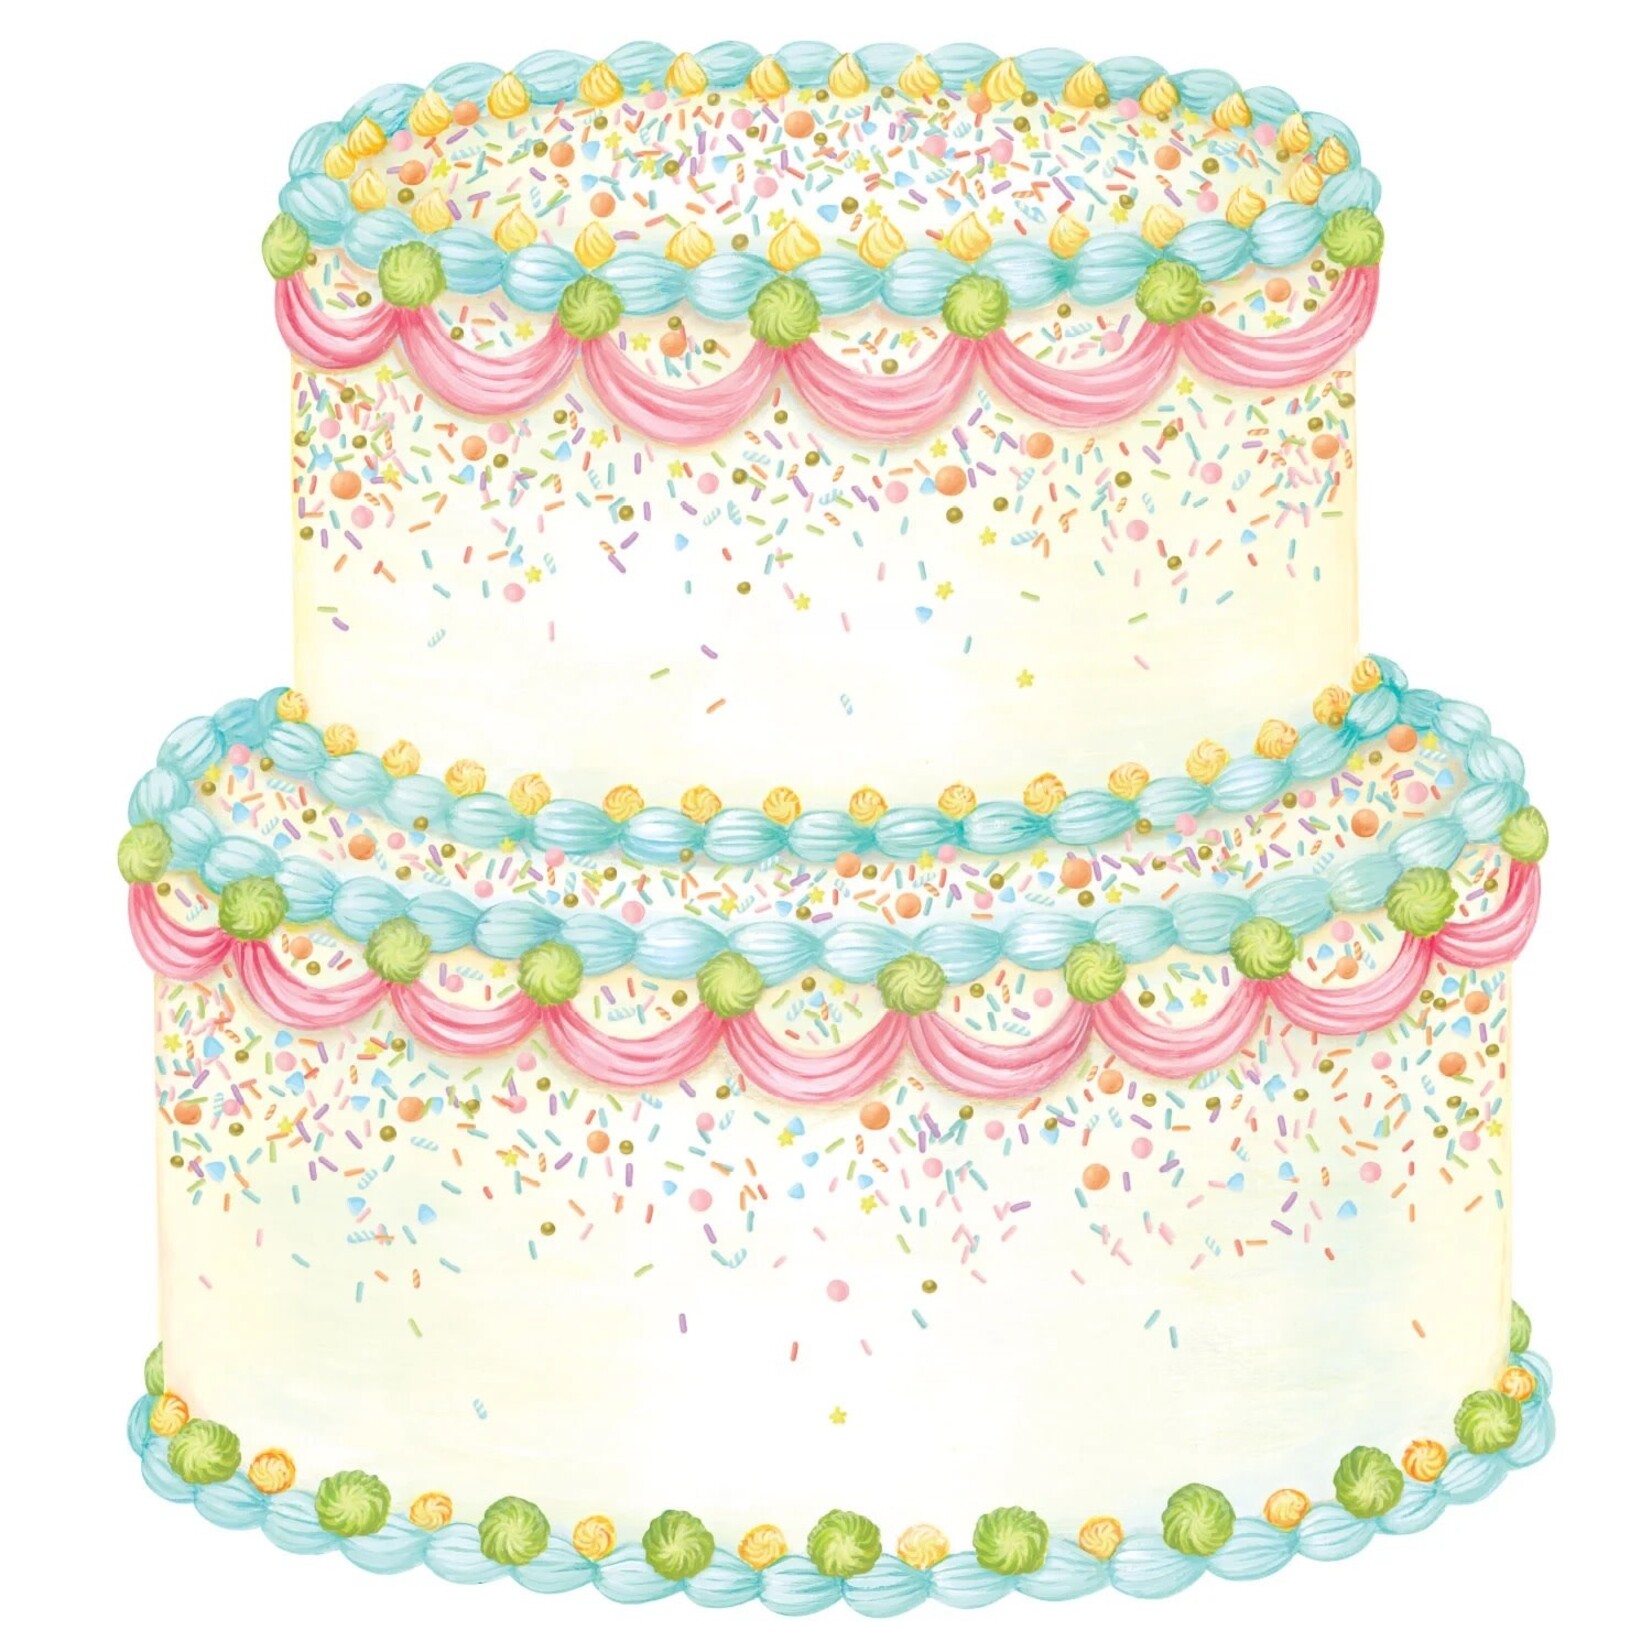 Hester & Cook Die-Cut Birthday Cake Placemat - 12 Sheets